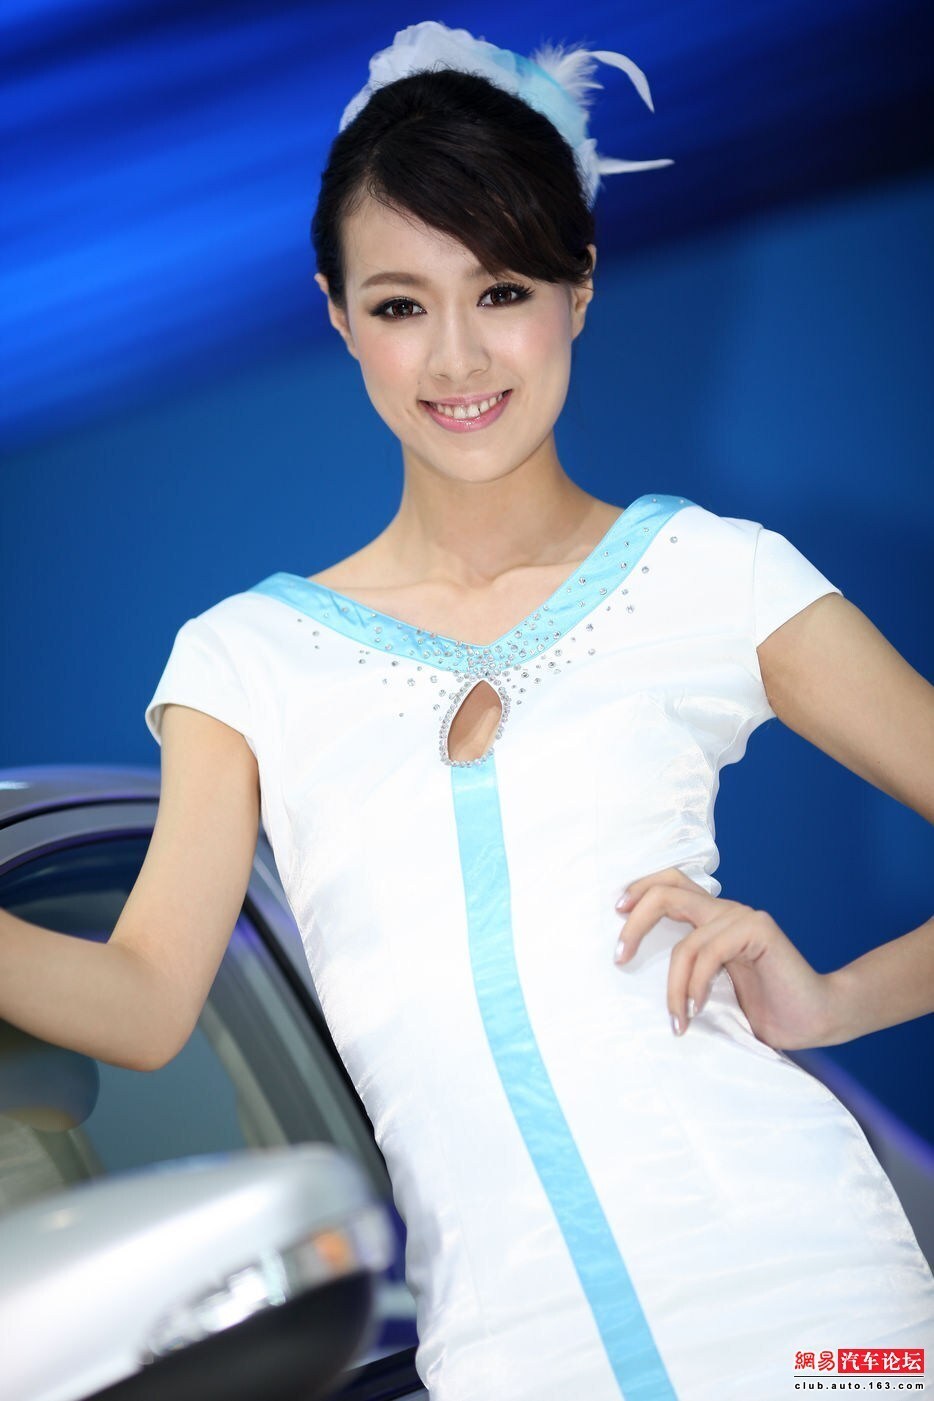 2012 Guangzhou auto show beauty model beauty picture package download